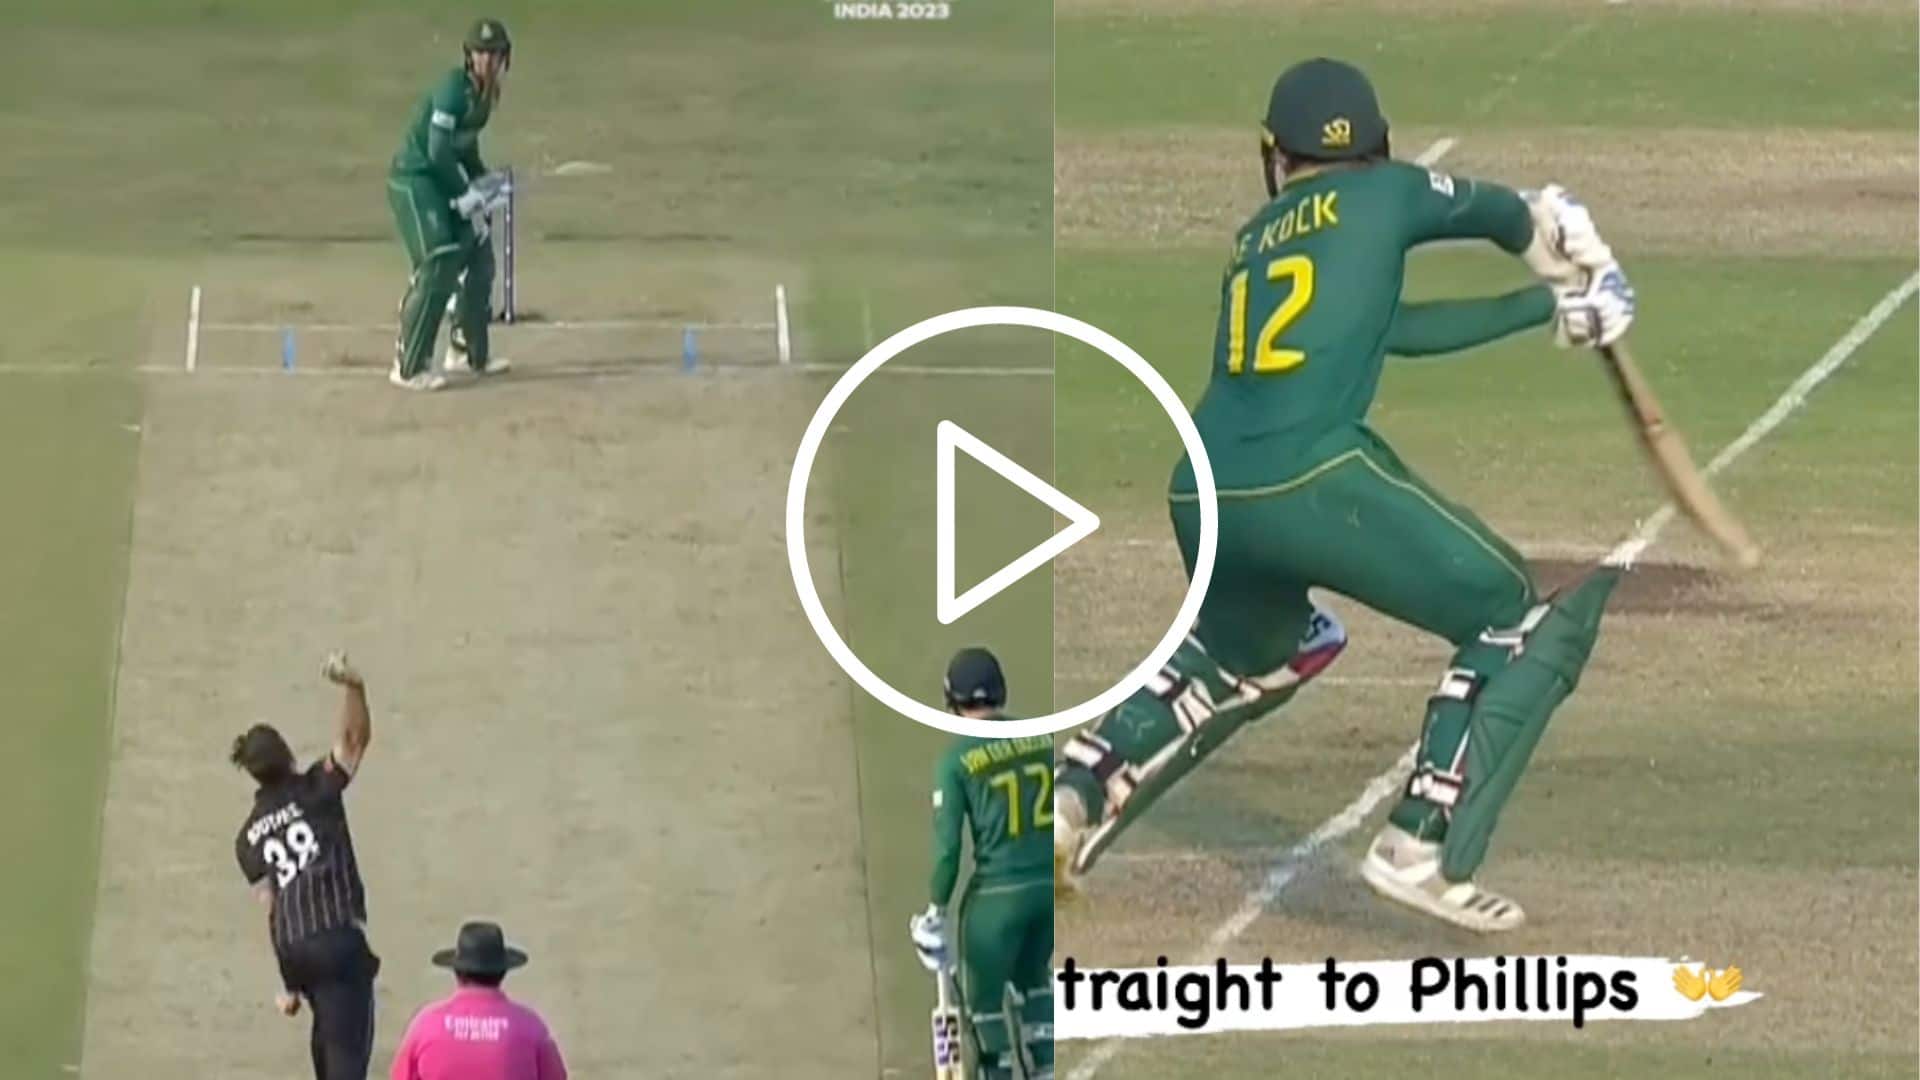 [Watch] Quinton de Kock Departs To A Magical Off-Cutter From Tim Southee